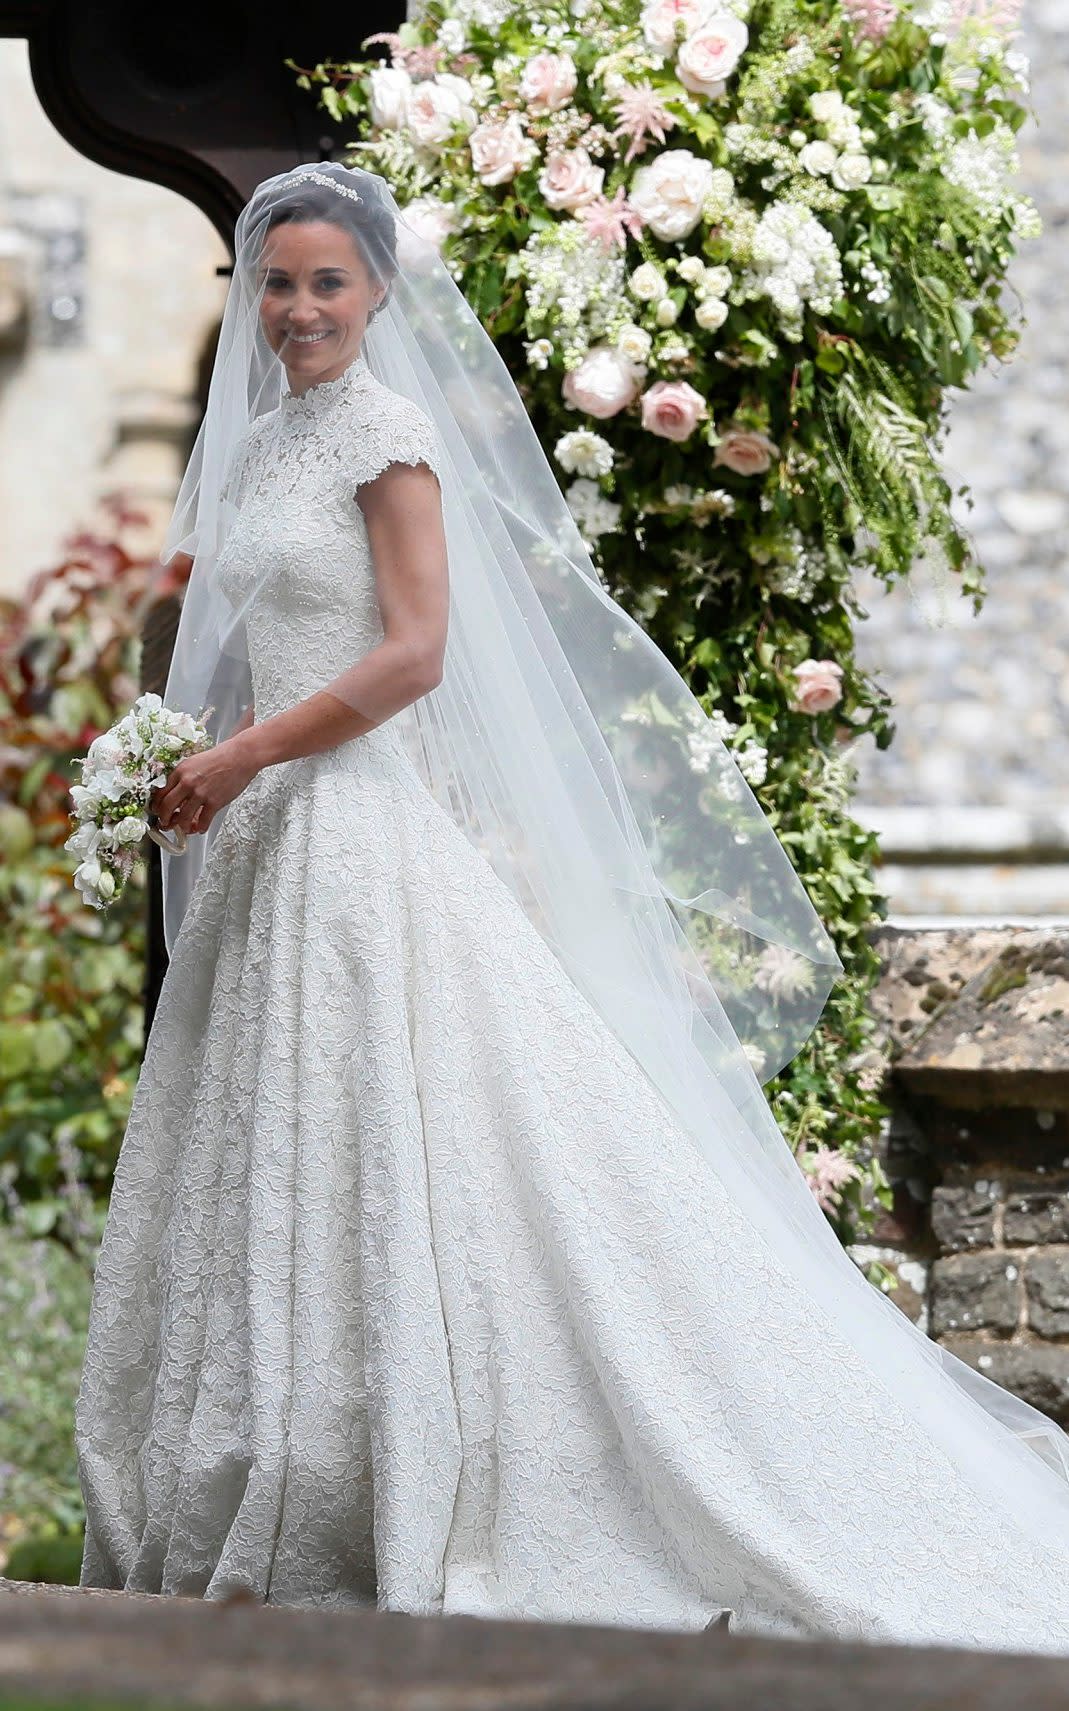 Pippa Middleton wearing Giles Deacon on her wedding day, May 2017 - AP POOL